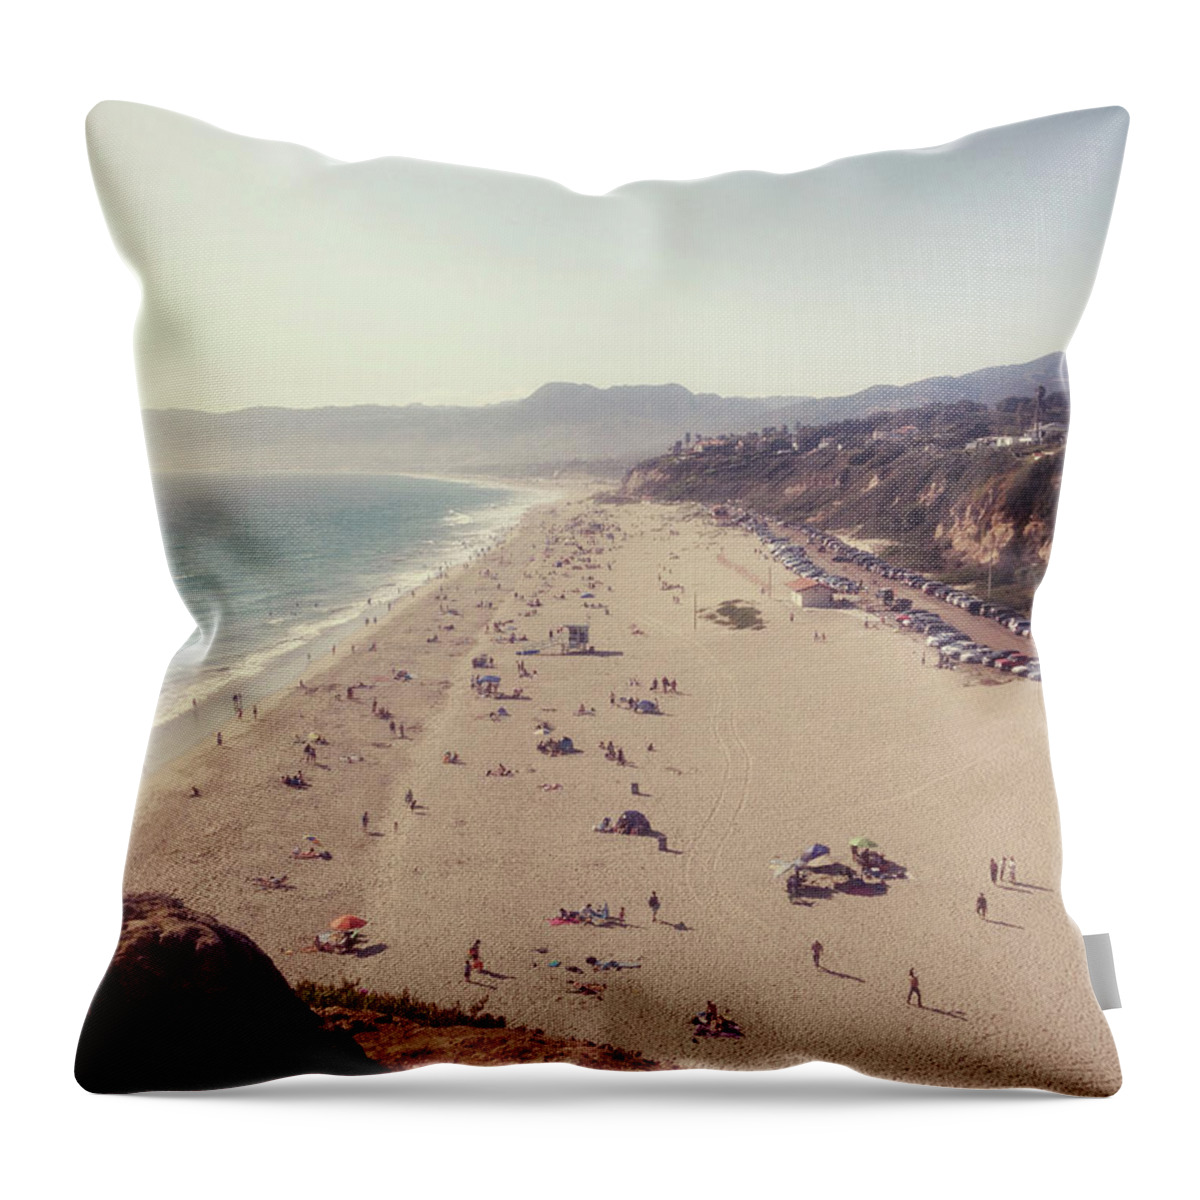 Water's Edge Throw Pillow featuring the photograph Zuma Beach At Sunset Malibu, Ca by William Andrew